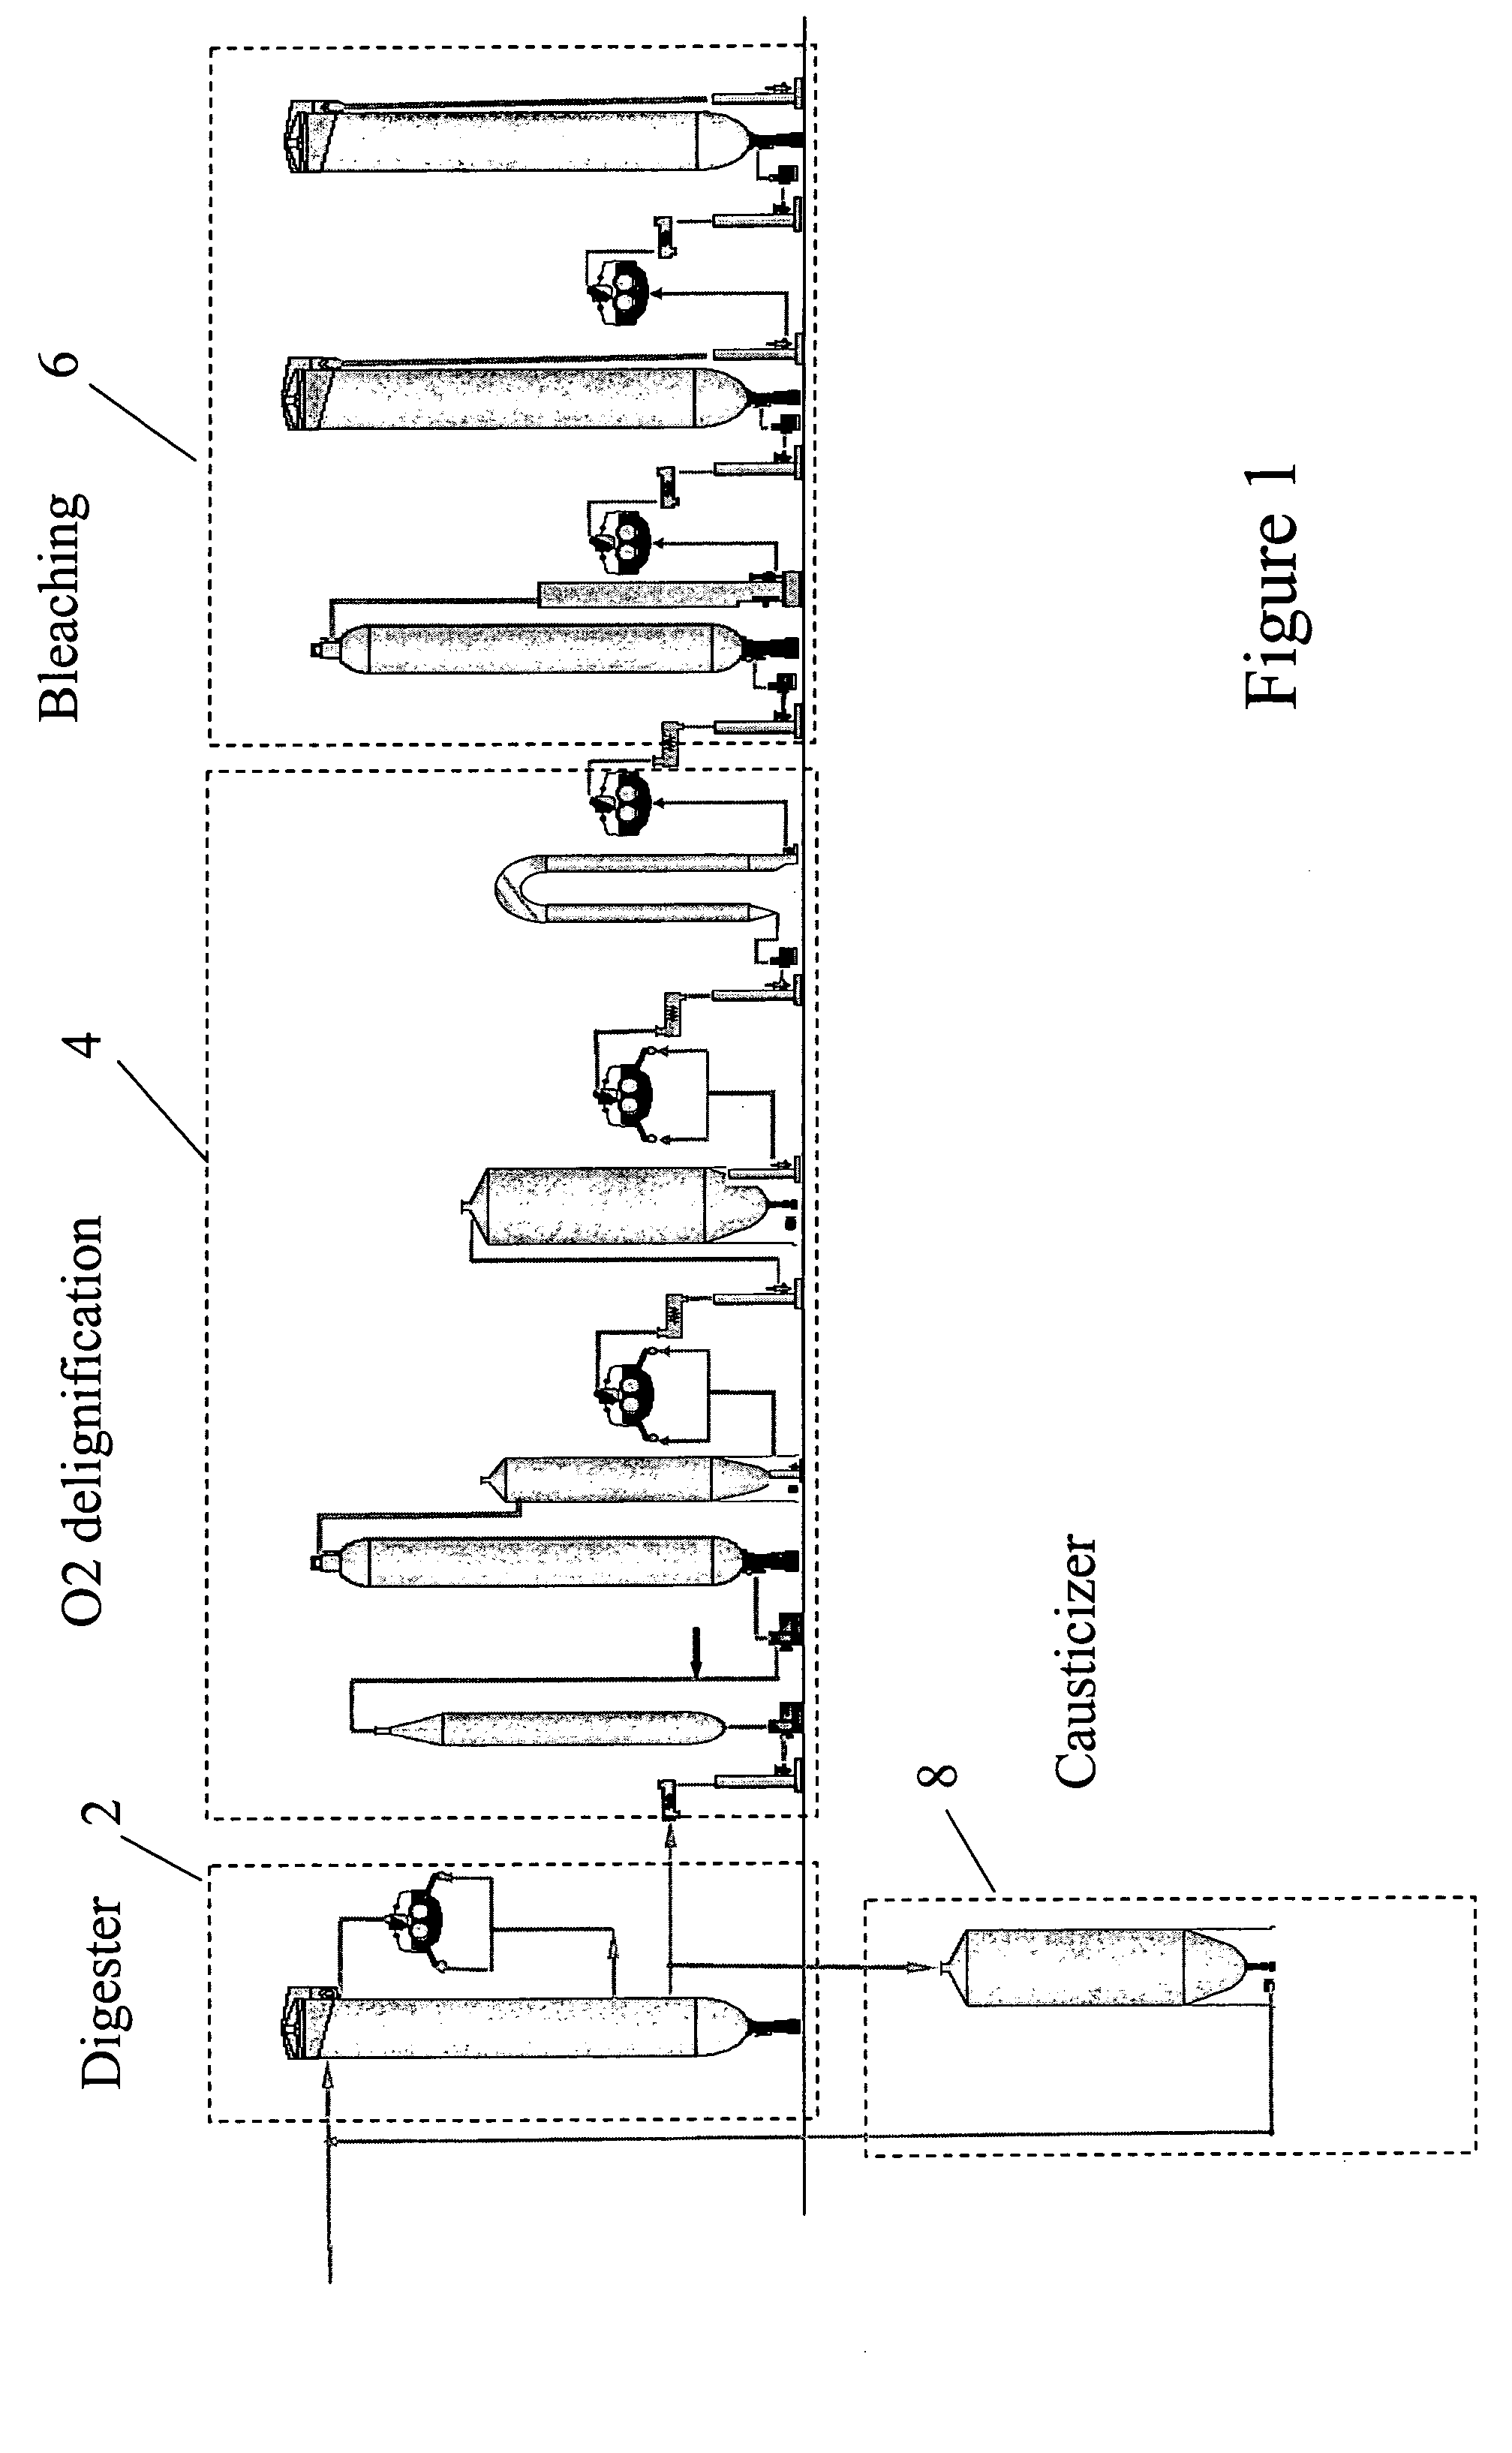 System and method for controlling a processor including a digester utilizing time-based assessments